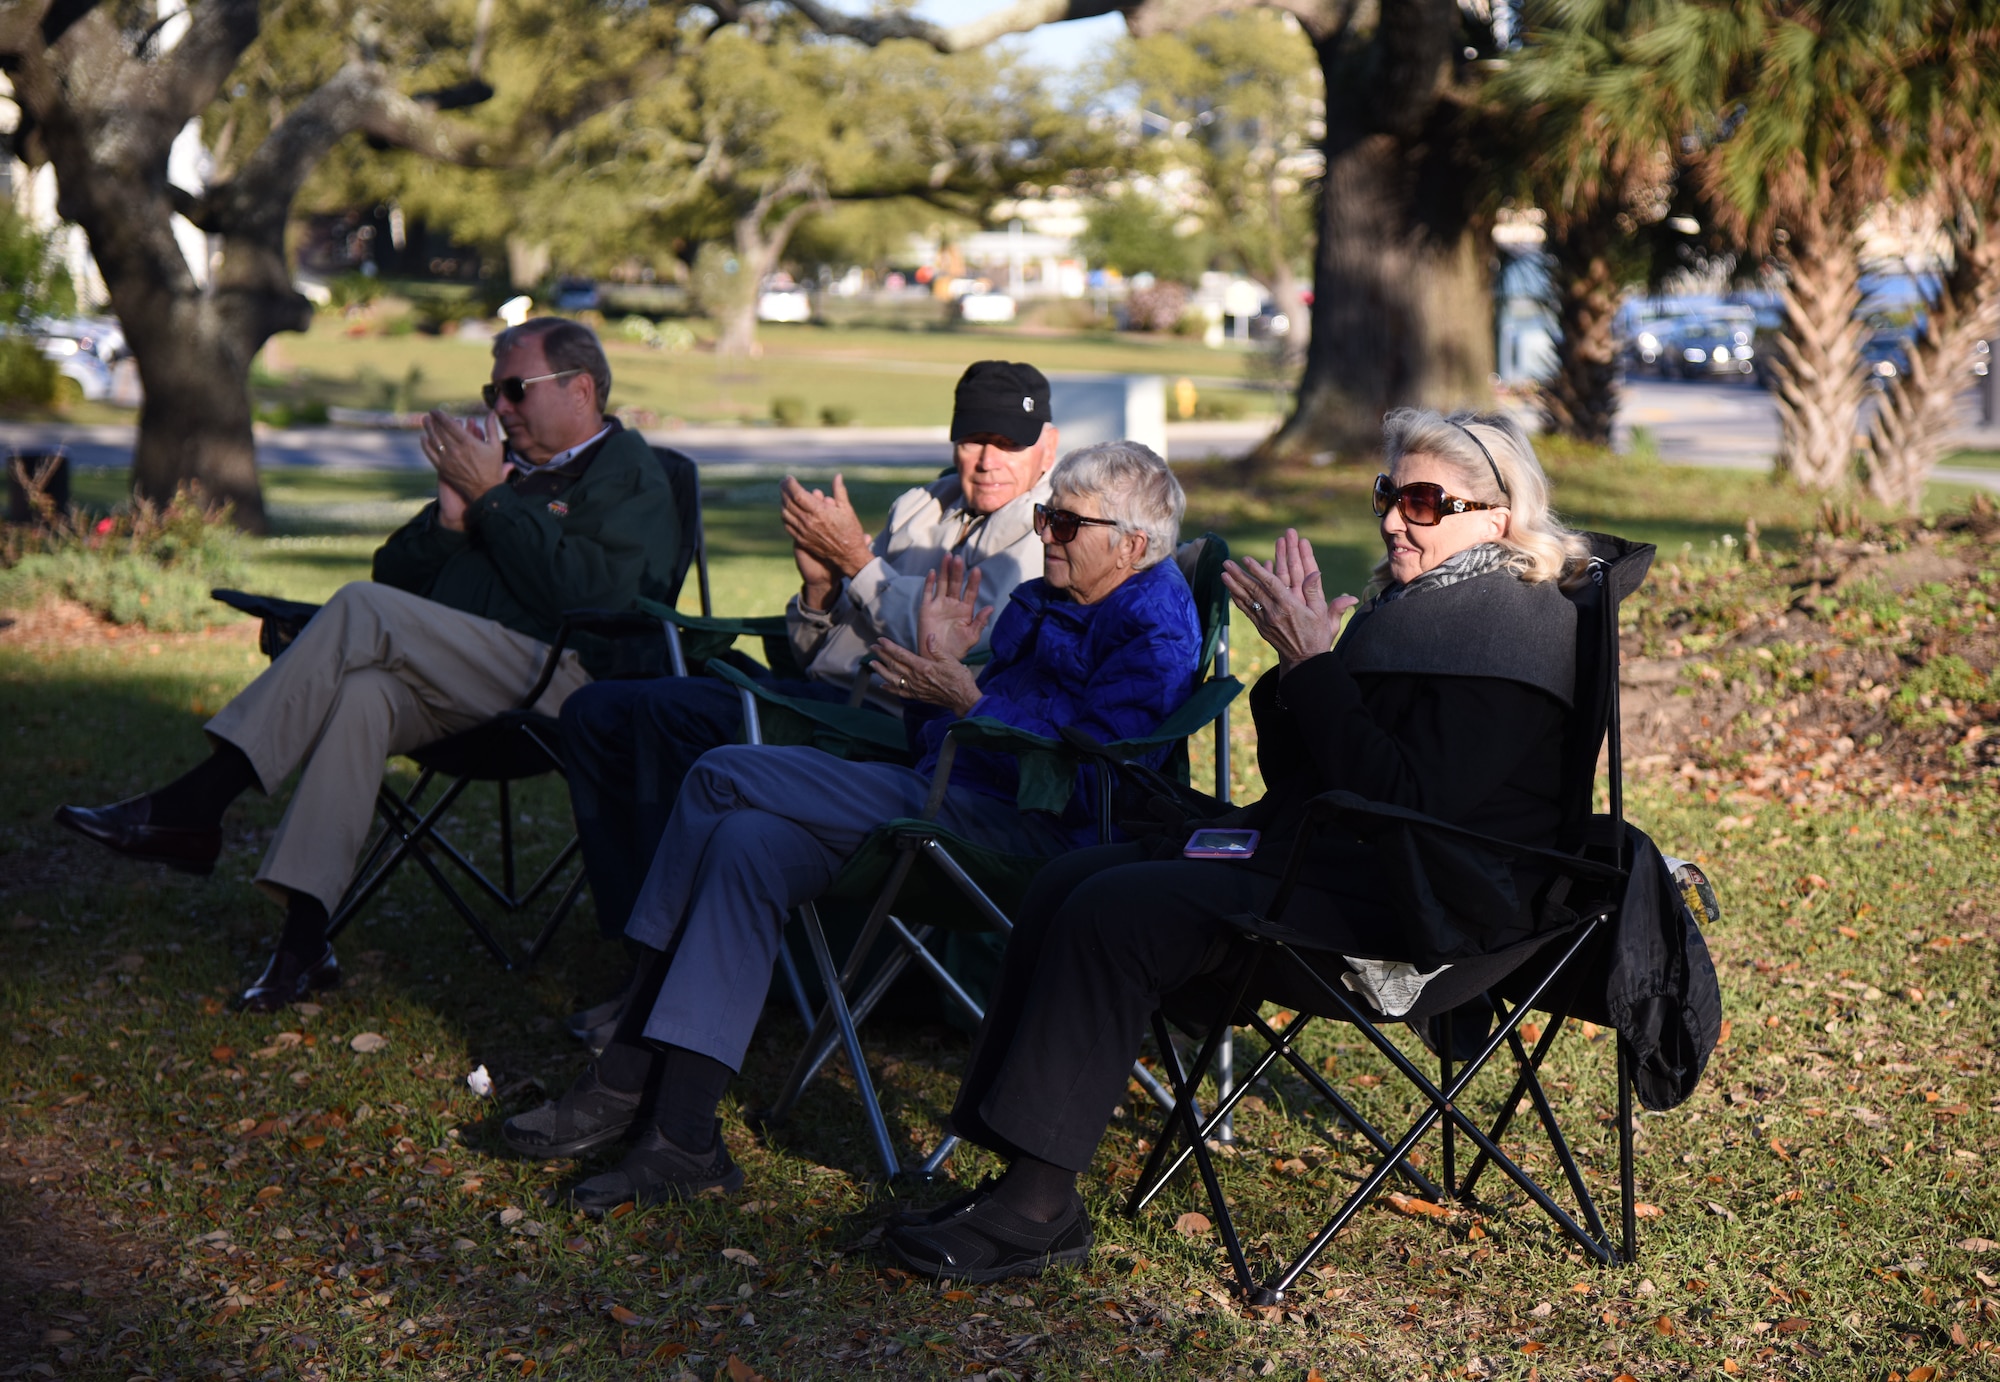 Audience members give a round-of-applause for the U.S. Army 41st Army Band’s performance at the Biloxi Lighthouse Park Pavilion March 13, 2018, in Biloxi, Mississippi. The band has been providing musical support and entertainment for over 50 years. They also performed at the White House Hotel, in Biloxi, Mississippi, and at the Vandenberg Commons on Keesler Air Force Base, Mississippi. (U.S. Air Force photo by Kemberly Groue)